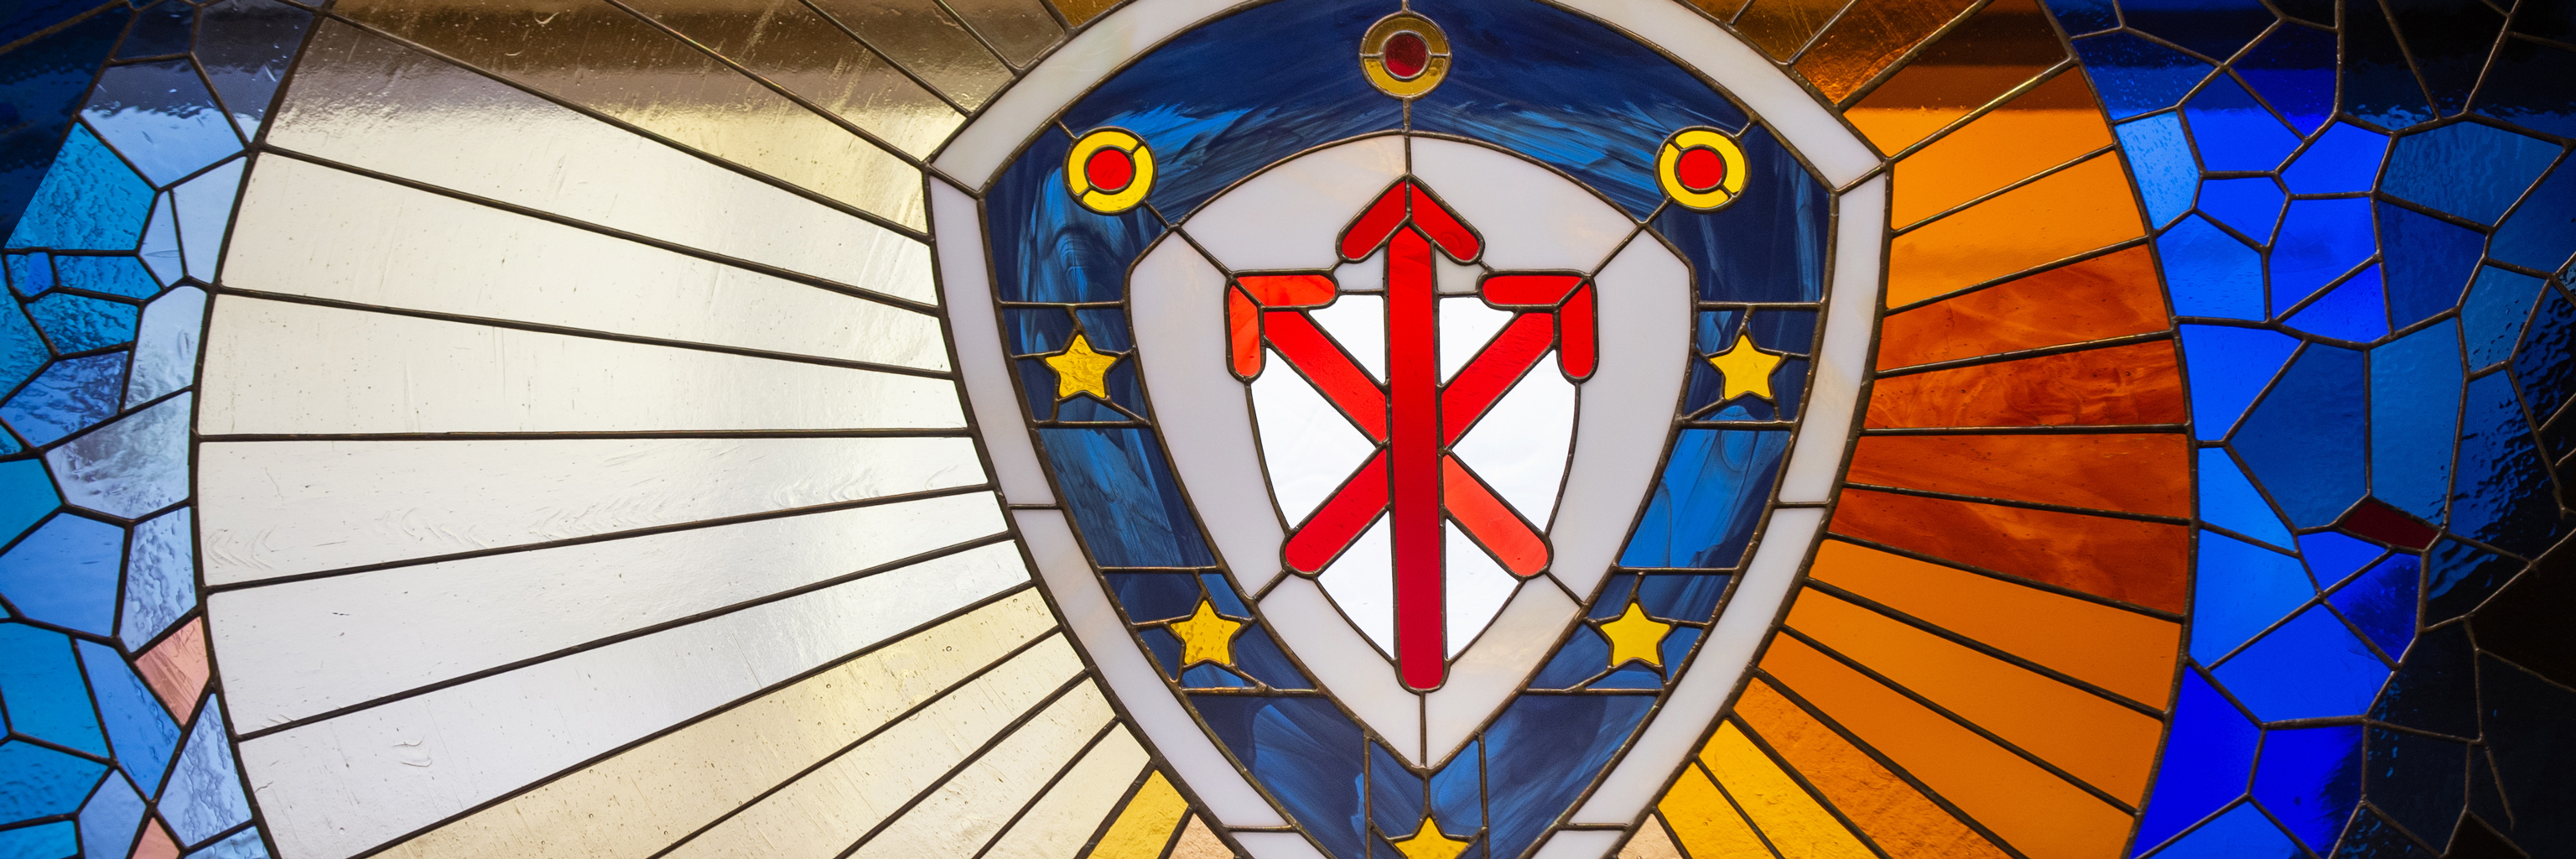 The College of Arts and Sciences crest in red, blue and yellow stained glass